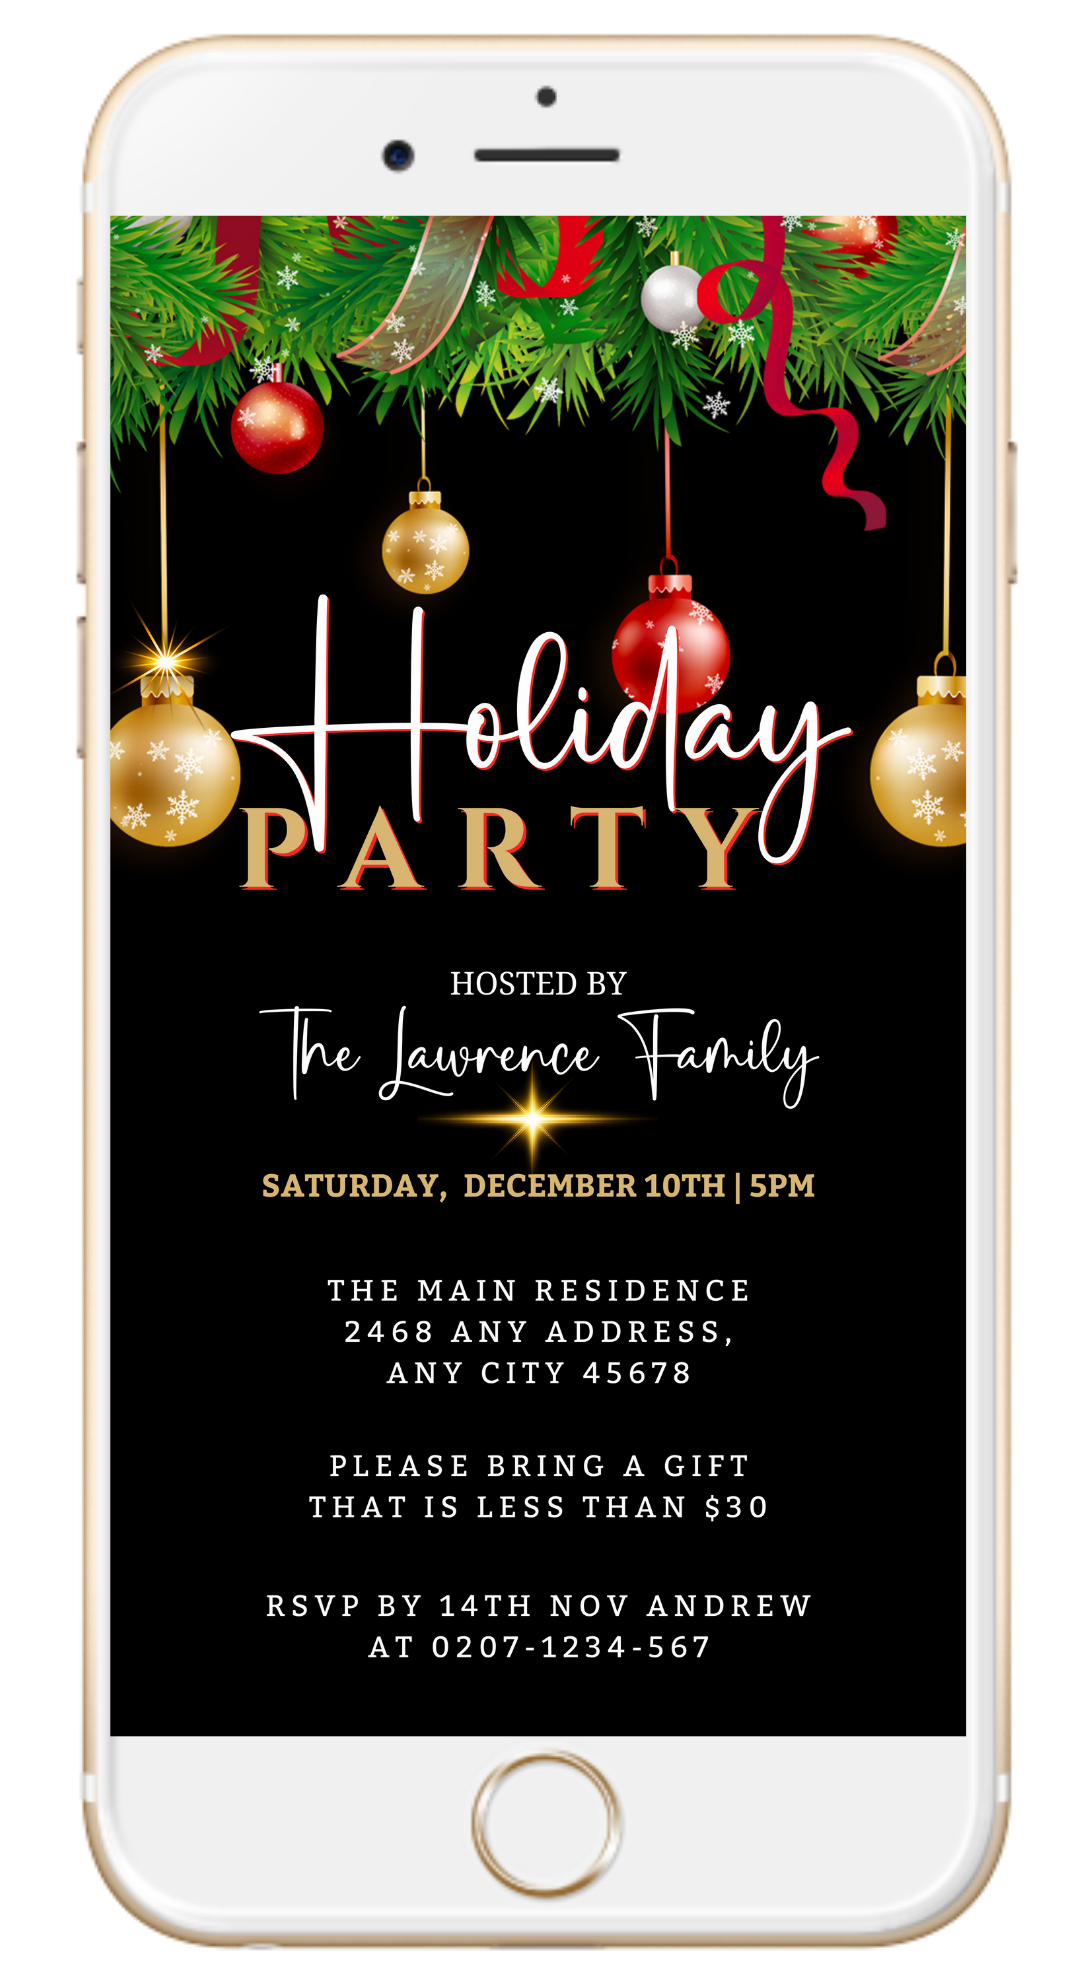 Gold Red Green Ornaments Holiday Party Evite displayed on a smartphone screen, showcasing editable digital invitation template with festive ornaments, ready for customization and electronic sharing.